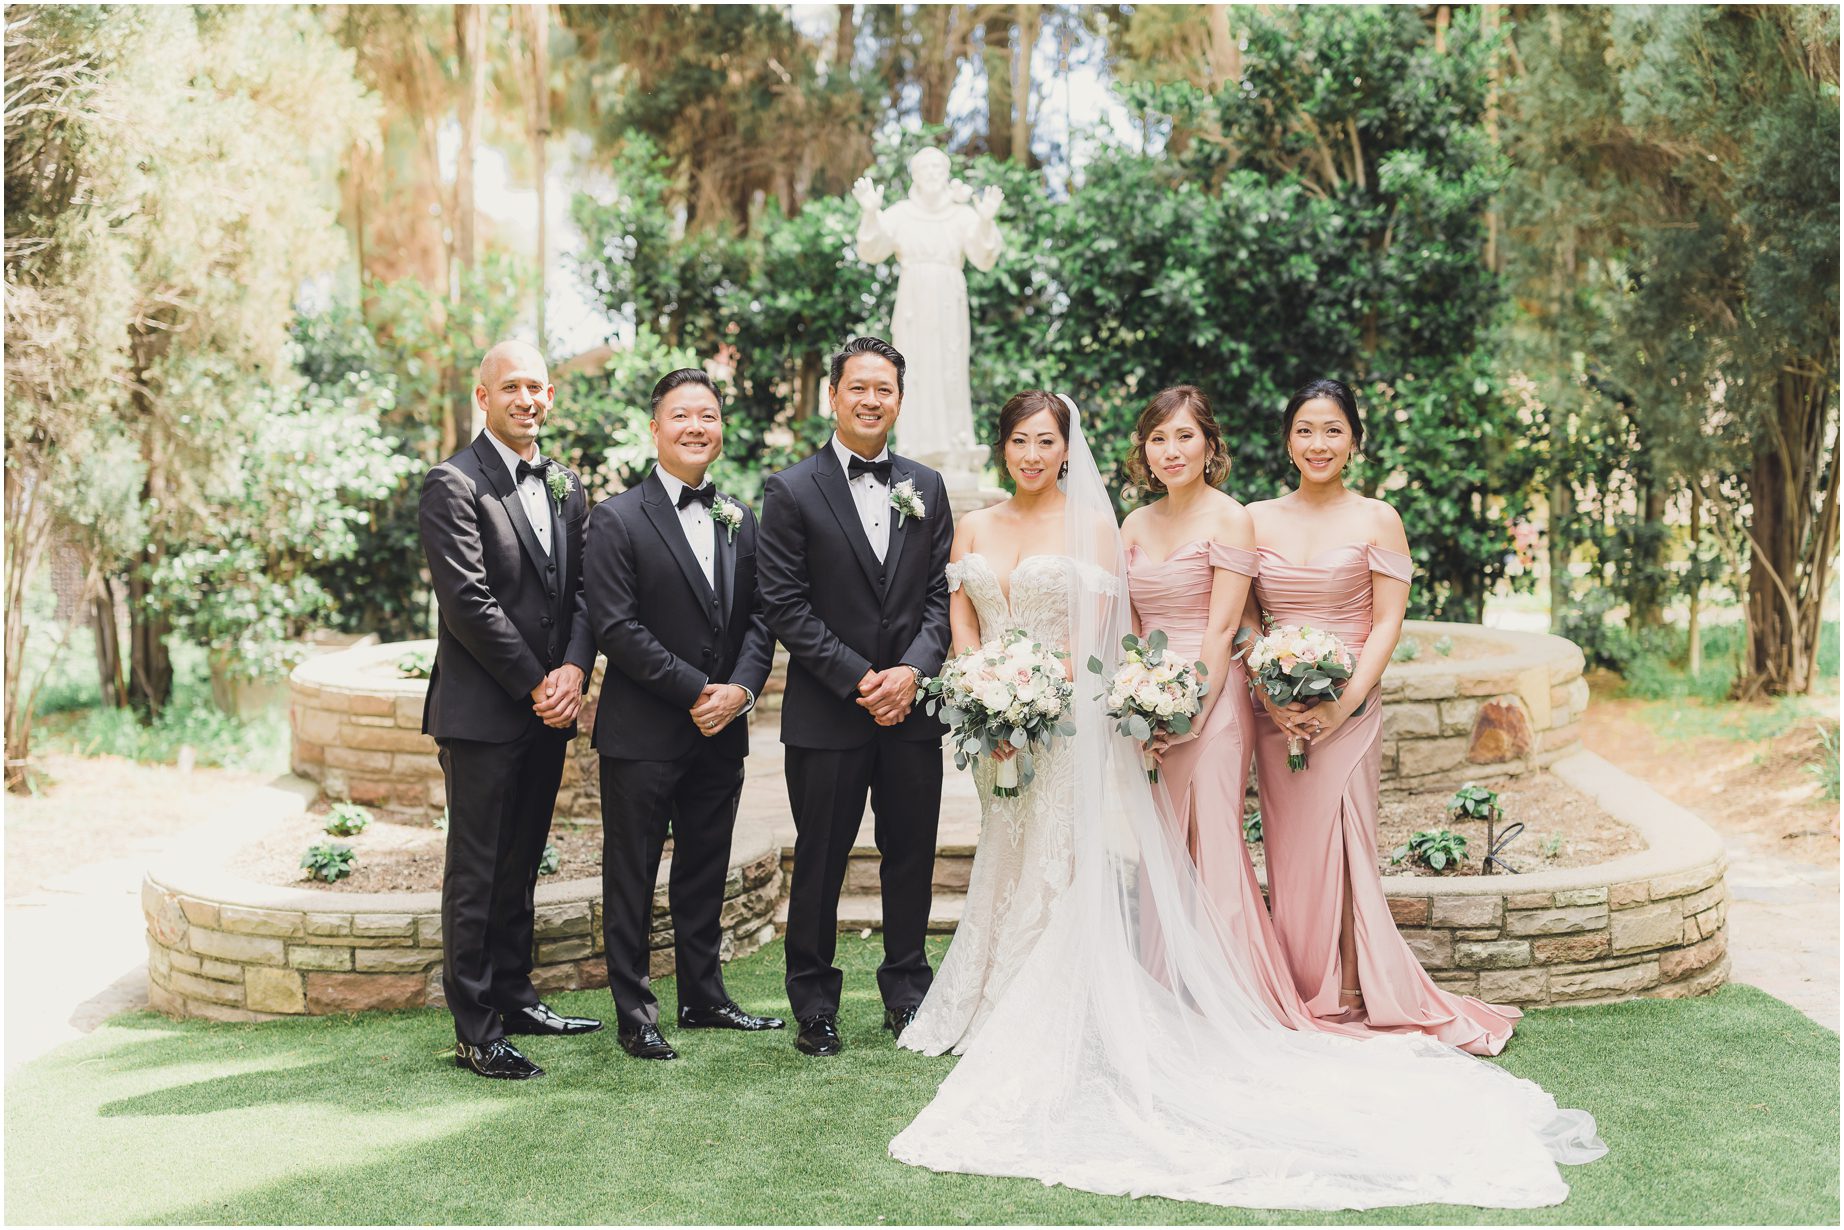 During a wedding at Villa del sol d'Oro, the bridal party poses for a traditional portrait in front of the statue of St Francis.